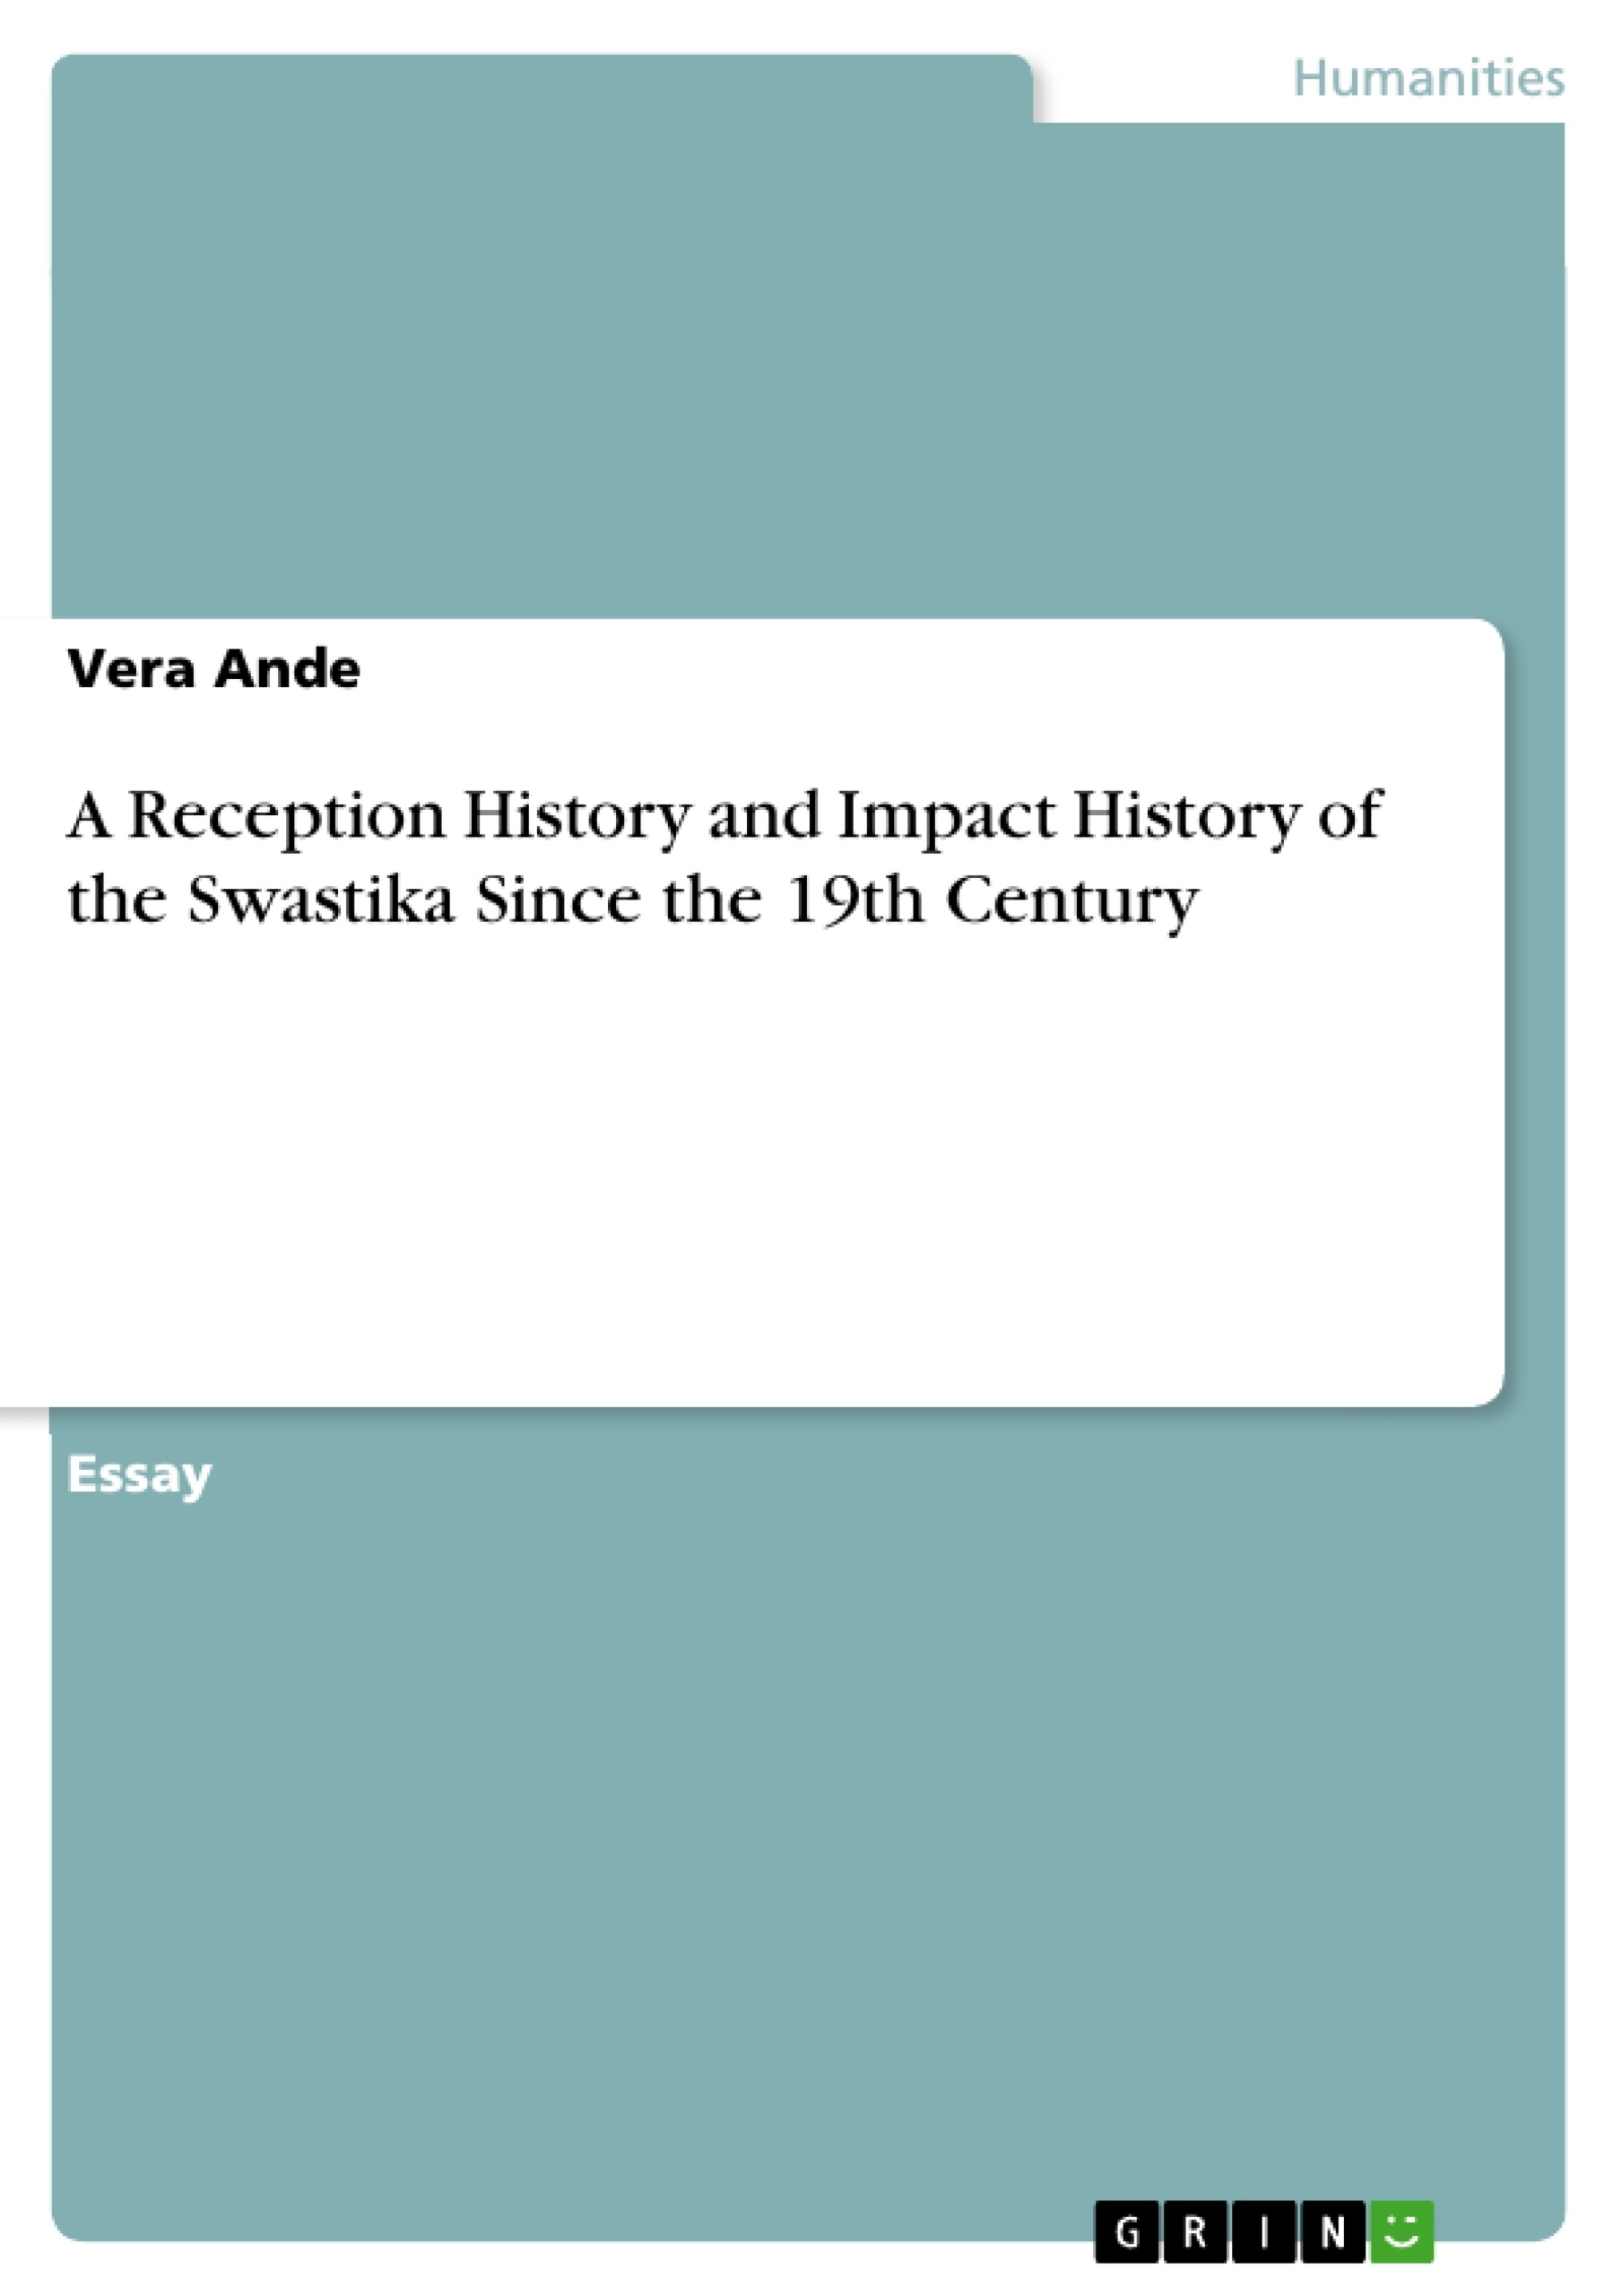 Titre: A Reception History and Impact History of the Swastika Since the 19th Century